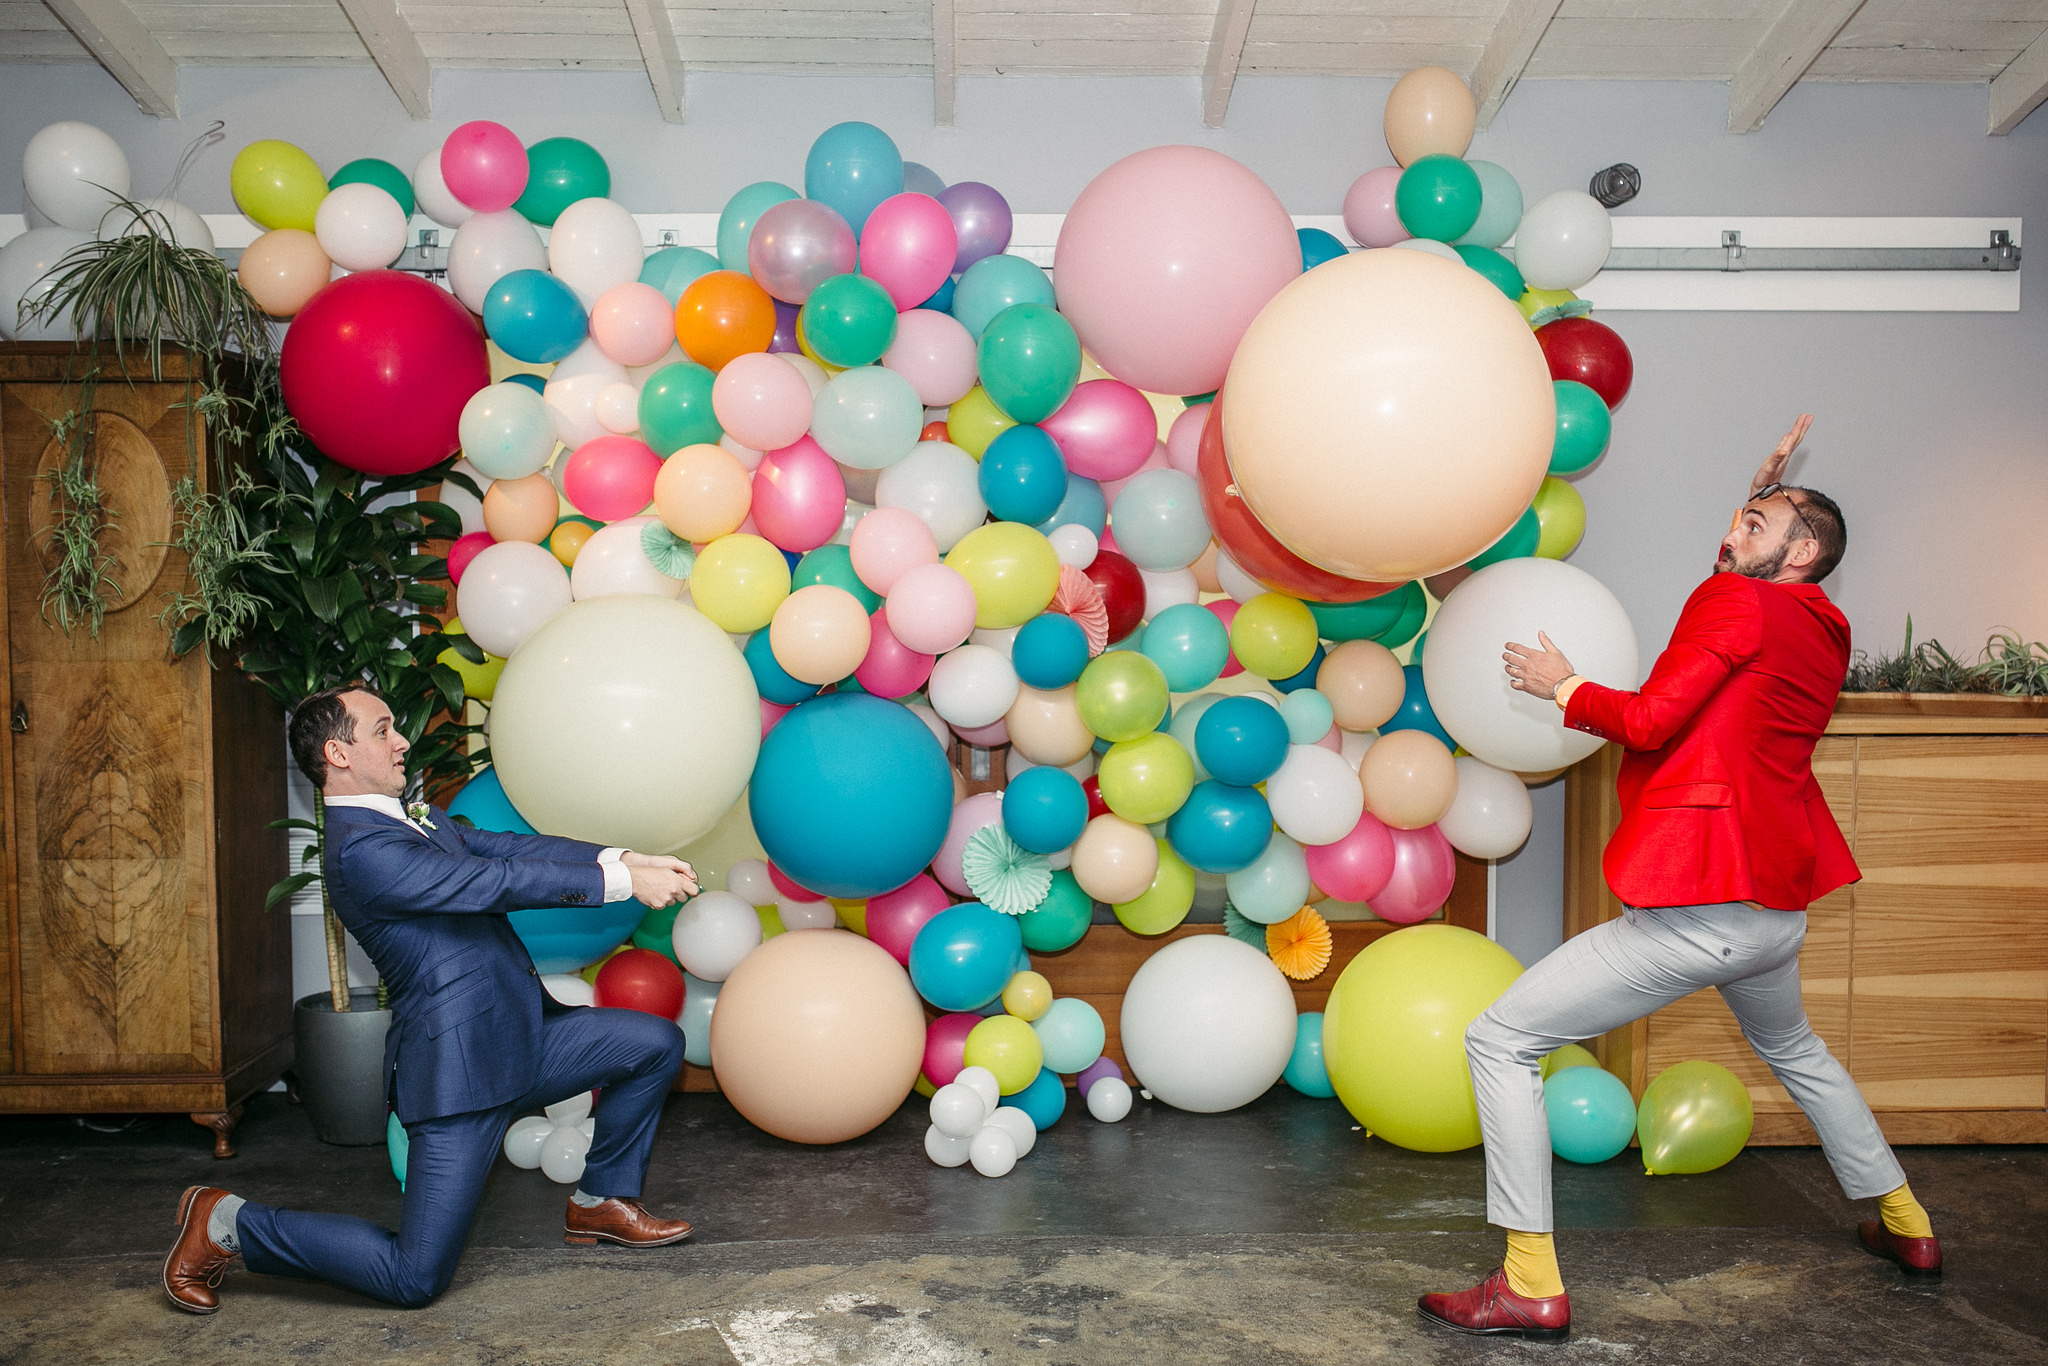 Two men in suits play with giant balloons in front of a colorful balloon installation